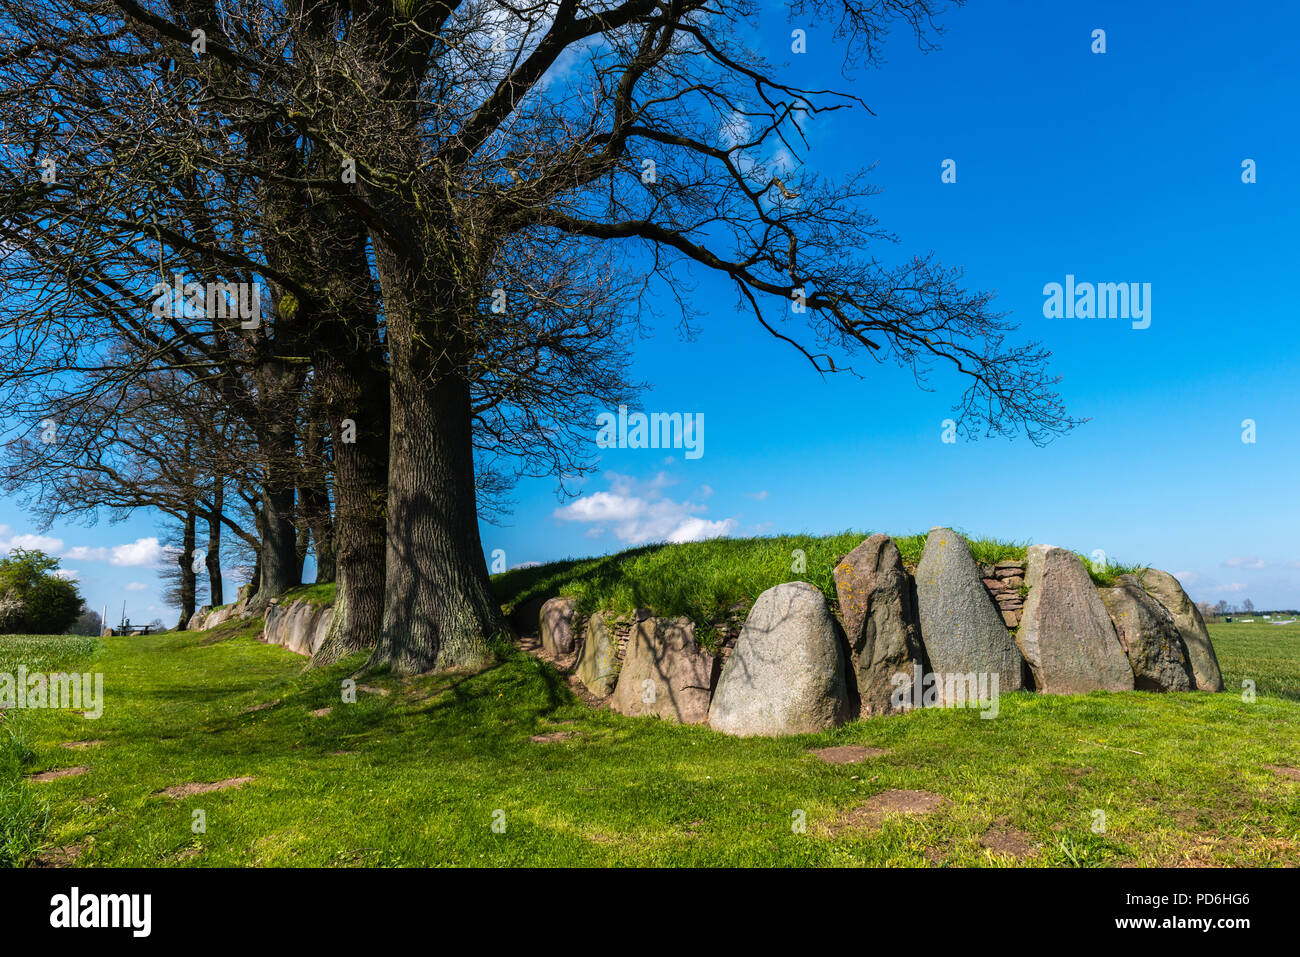 Burial site, stone age, about 2500 BC, passage tomb, archaeological monument, Karlsminde, Waabs, Schwansen, Schleswig-Holstein, Germany, Europe Stock Photo